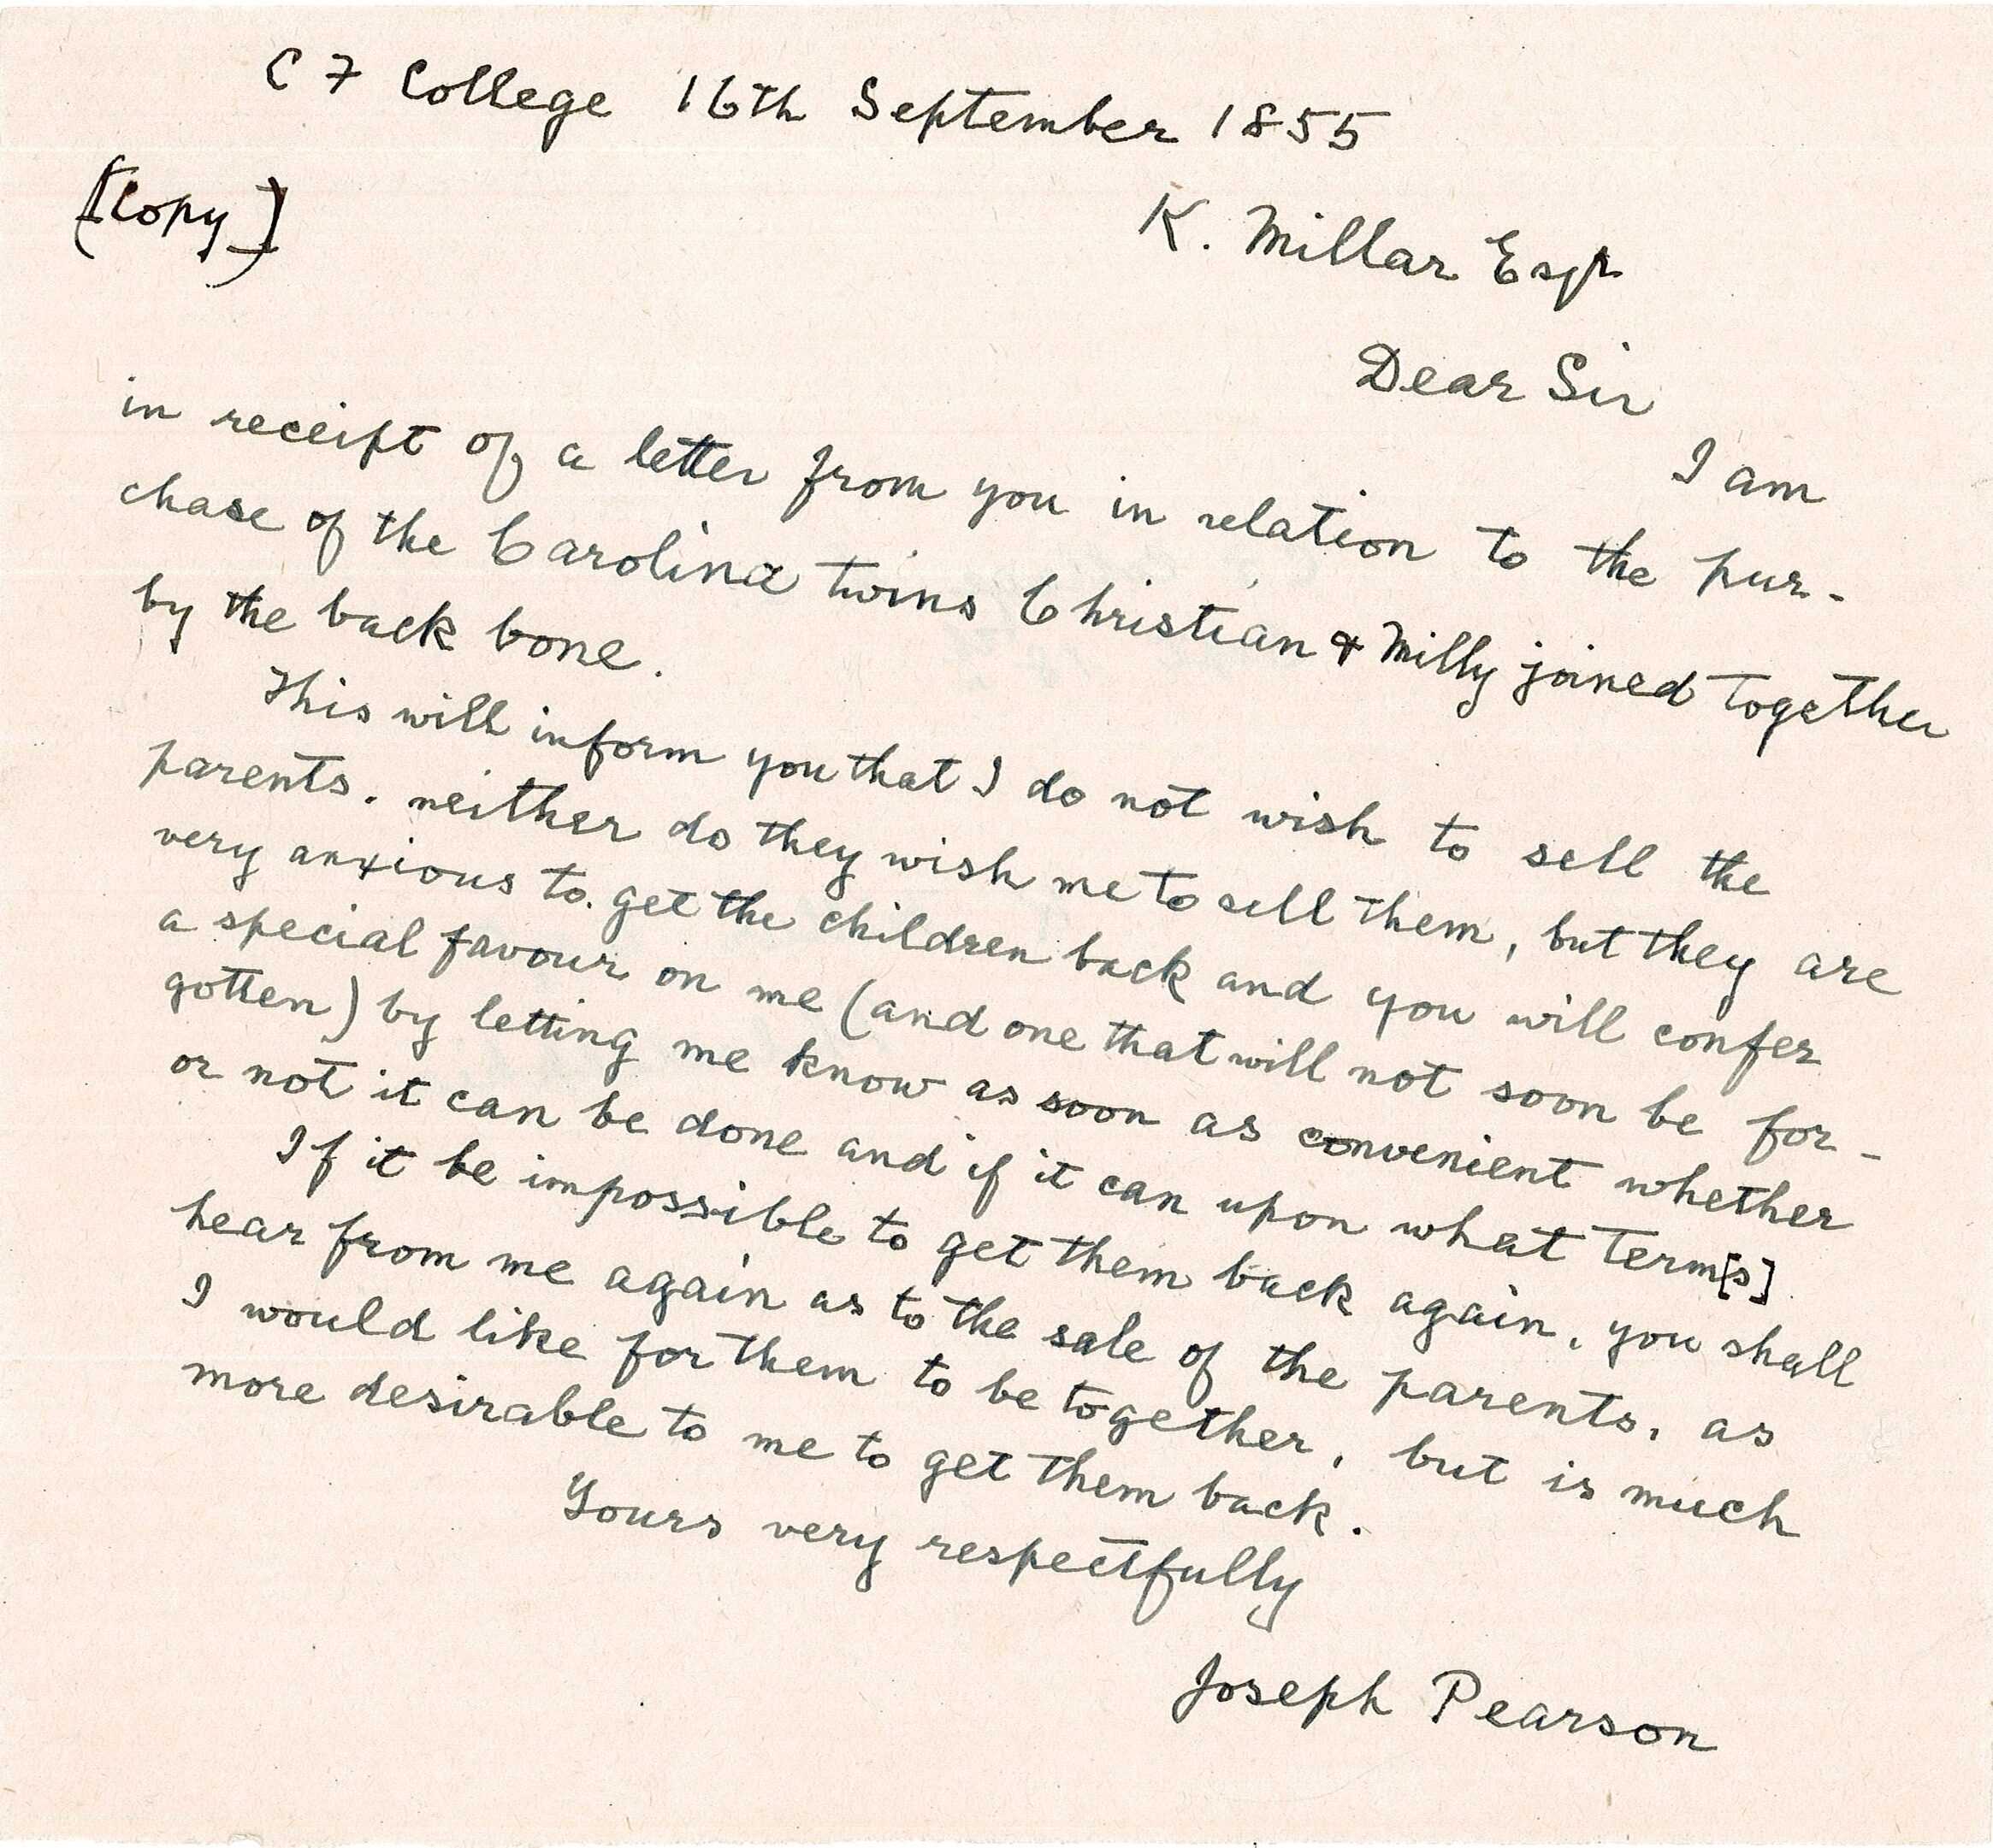 A handwritten letter in cursive. It is dated "16th September 1855" and signed by Joseph Pearson.